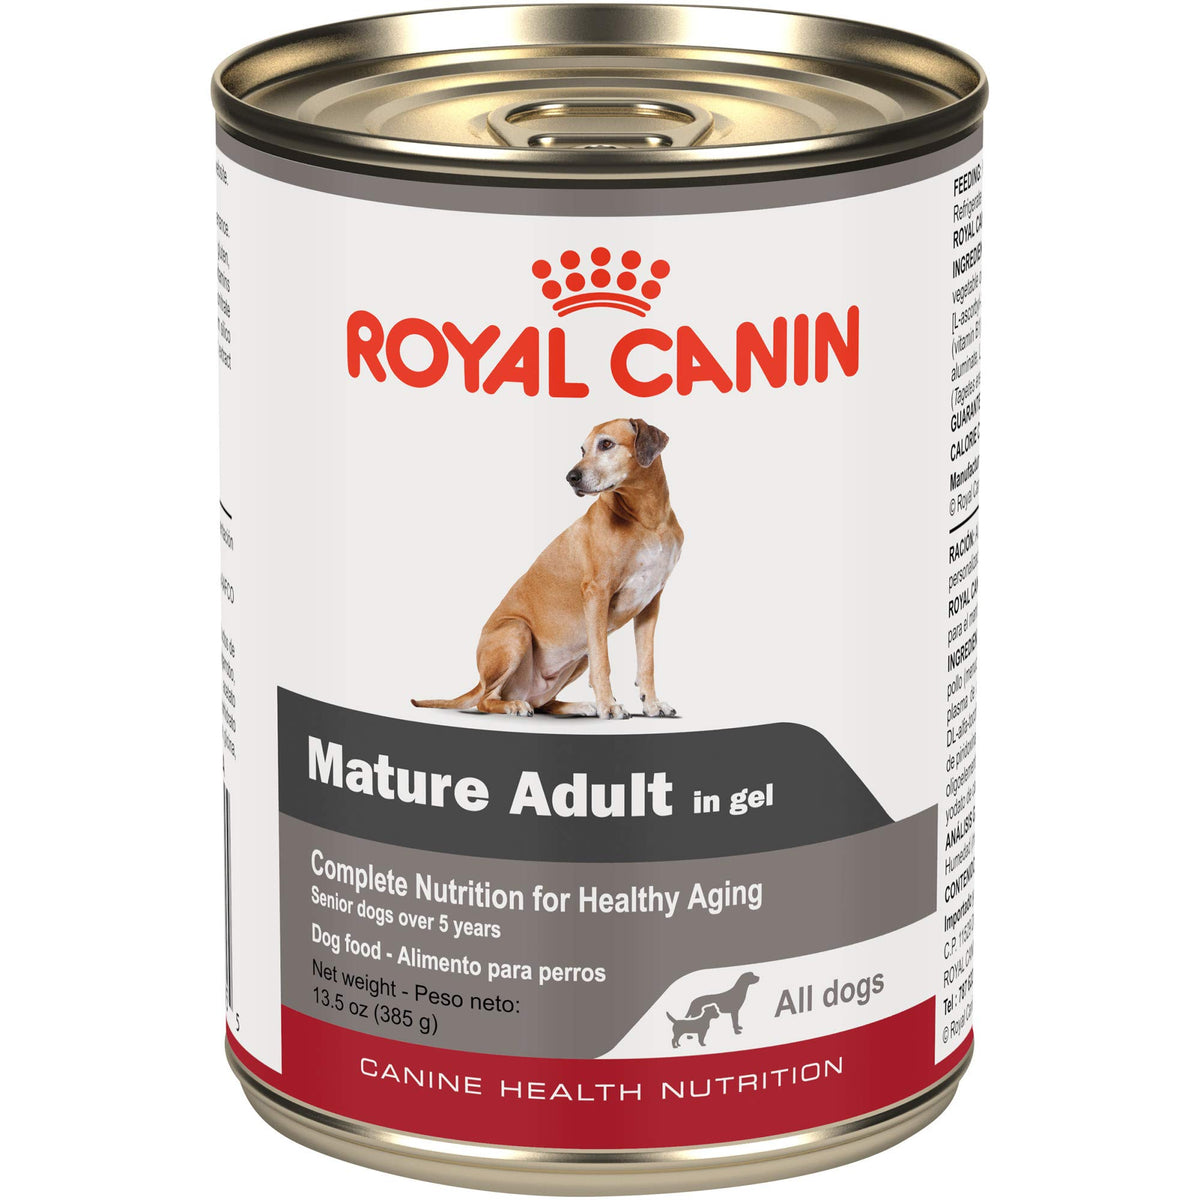 Royal Canin Canine Health Nutrition Mature Adult In Gel Canned Dog Food, 13.5 oz can (12-count)